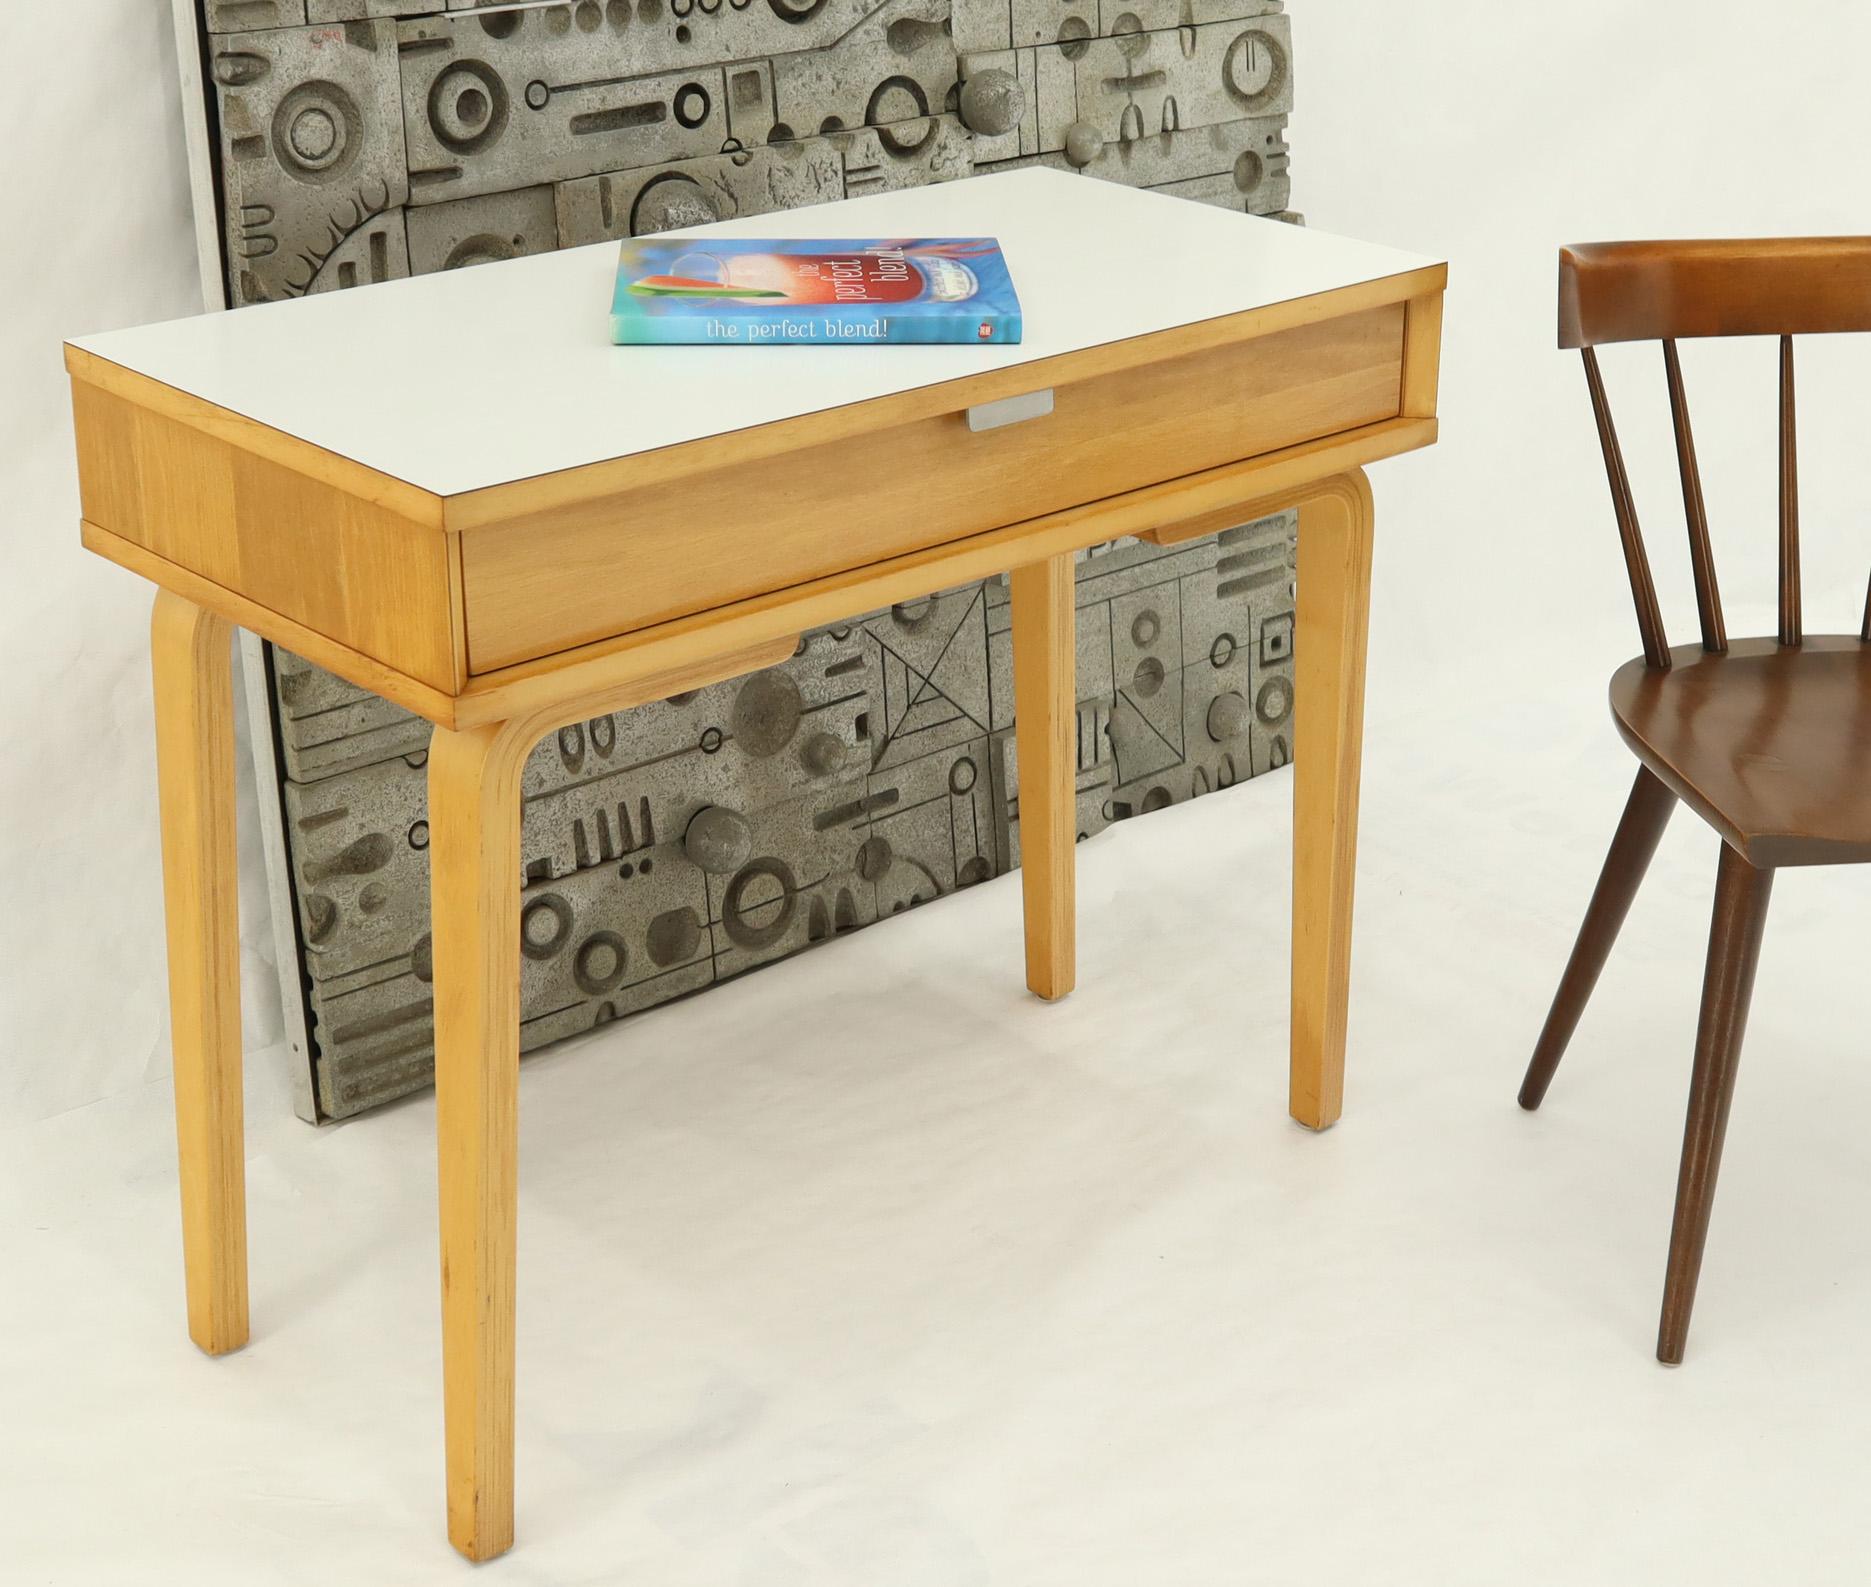 Mid-Century Modern petit fine bent birch plywood laminated top small desk or console table.